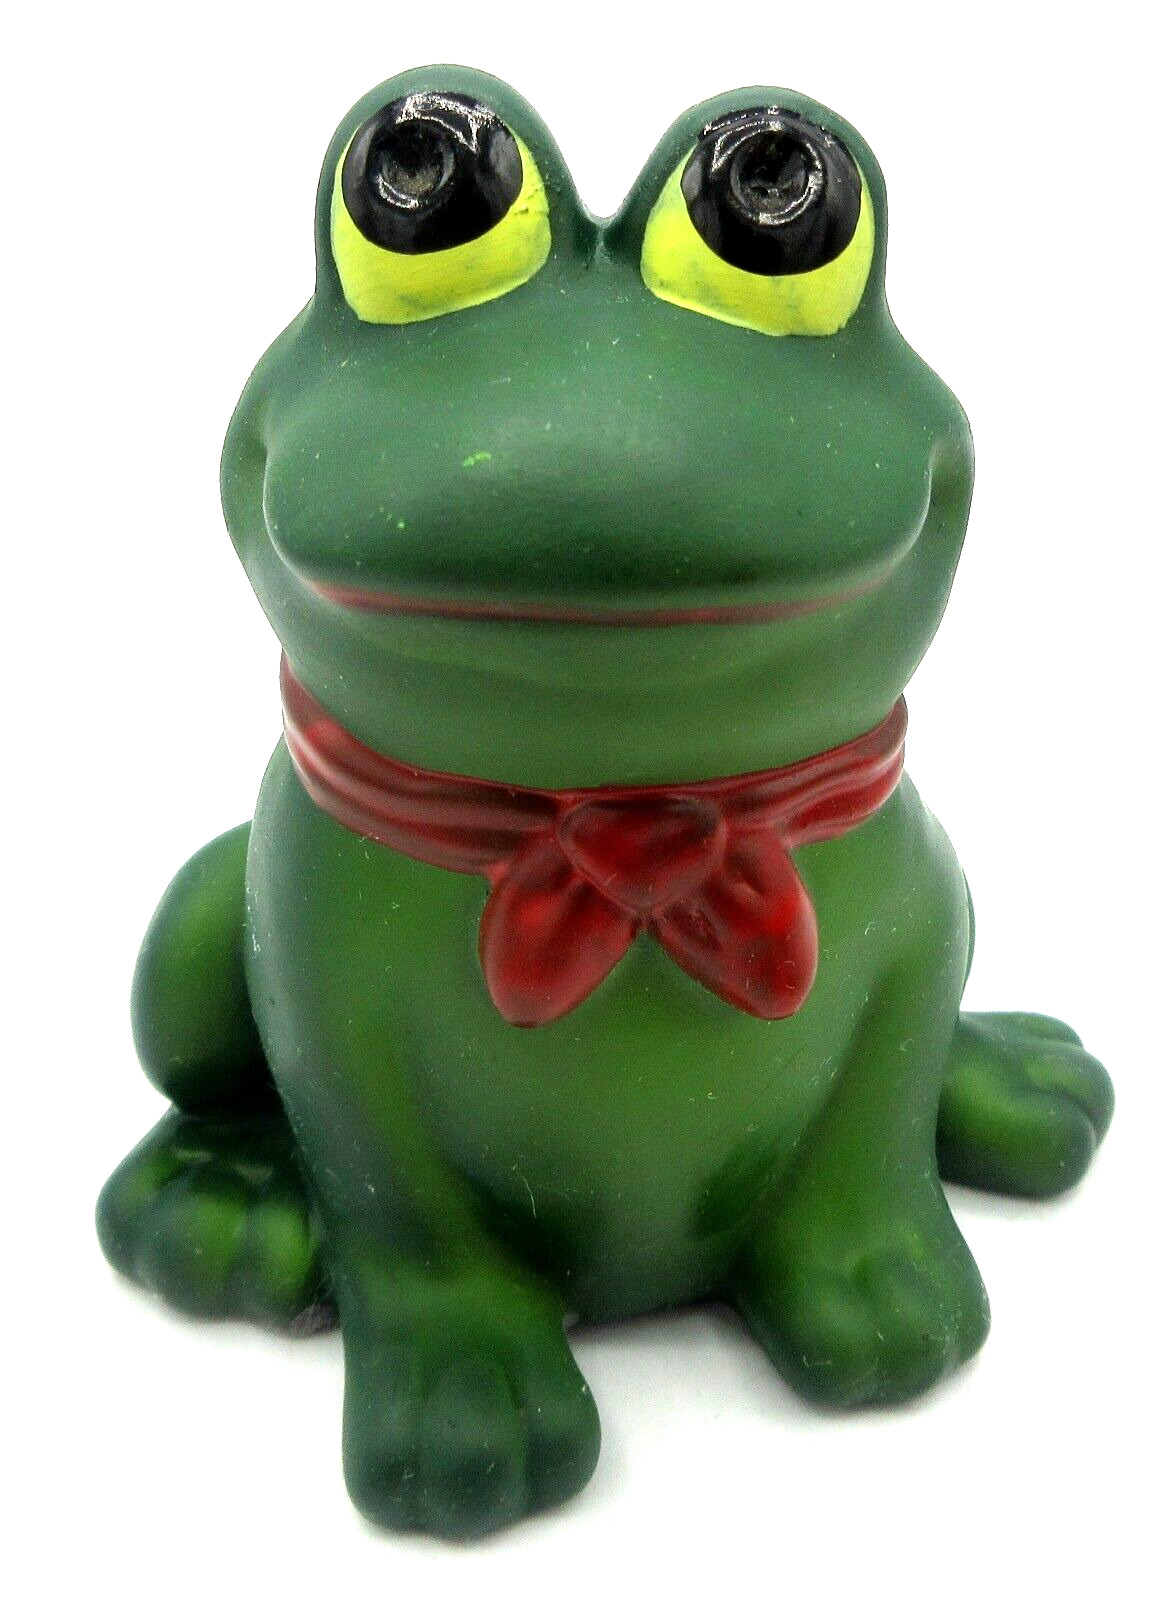 Hand Painted Ceramic Frog with Red Tie Airbrushed Body Nice Shadows 4 Inches